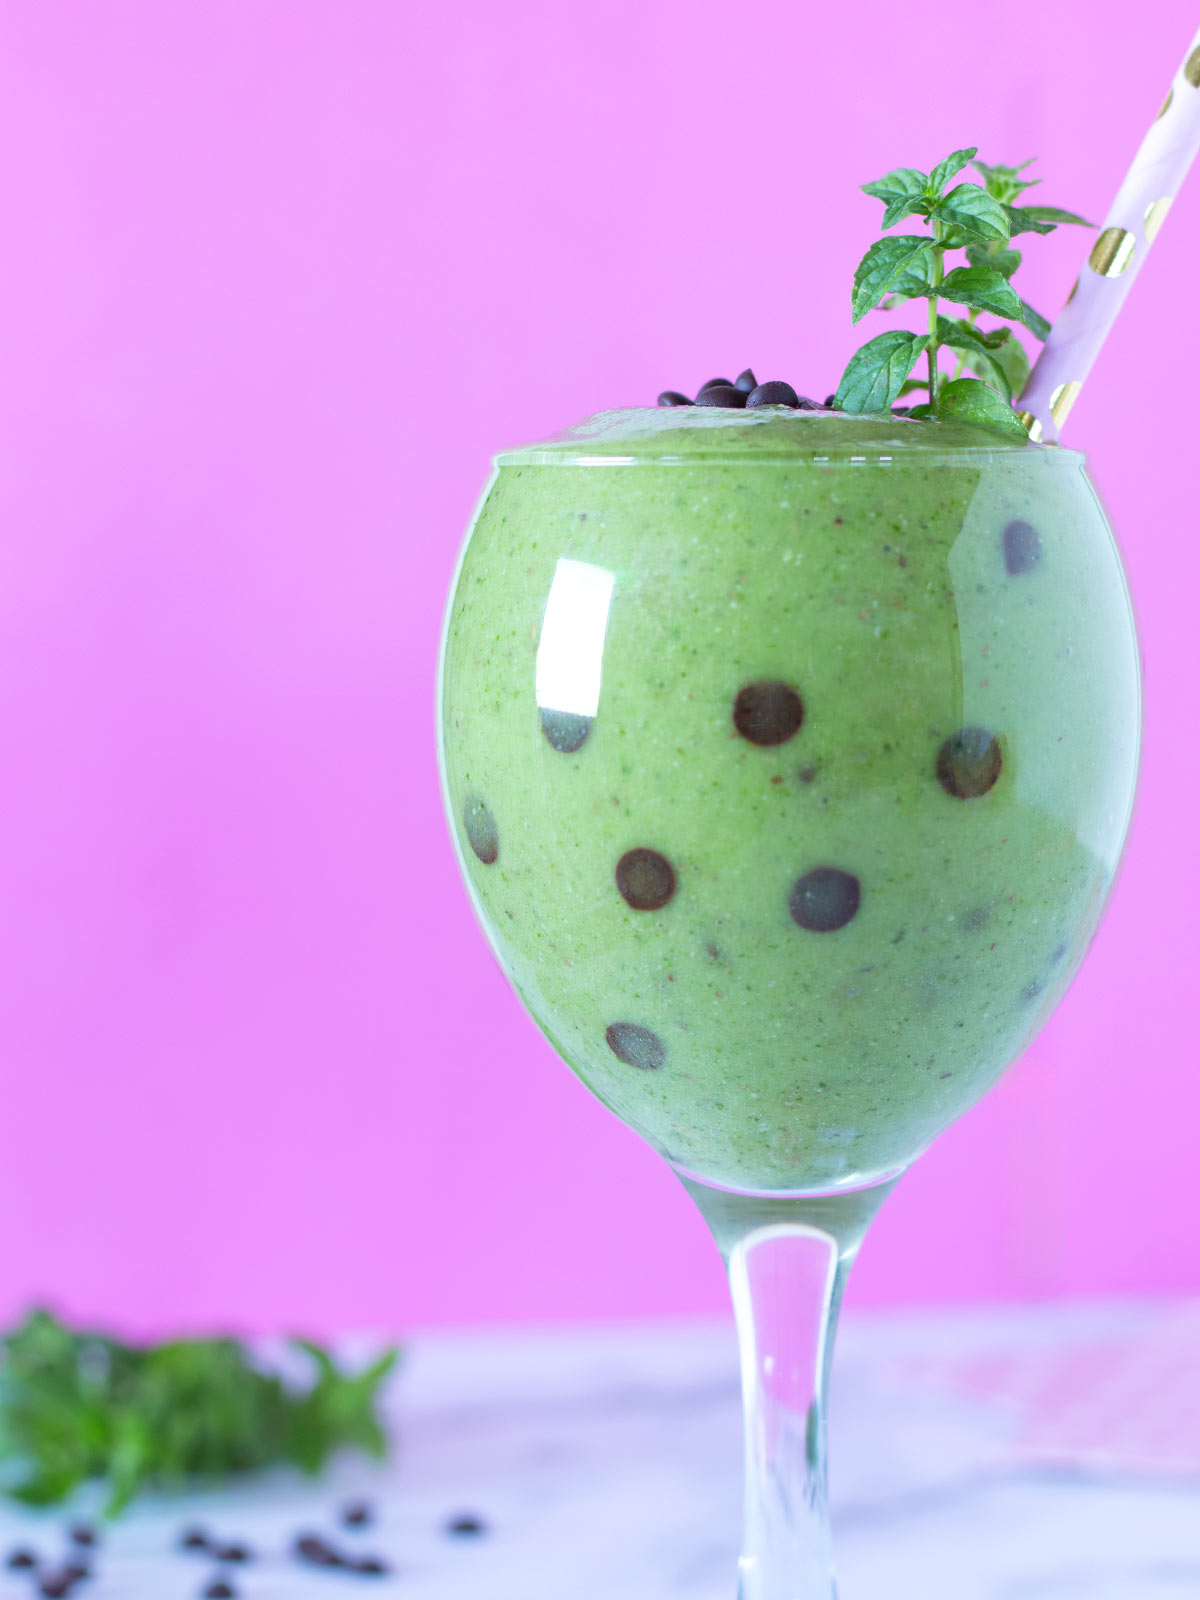 Green smoothie with mint leaves and vegan chocolate chips.